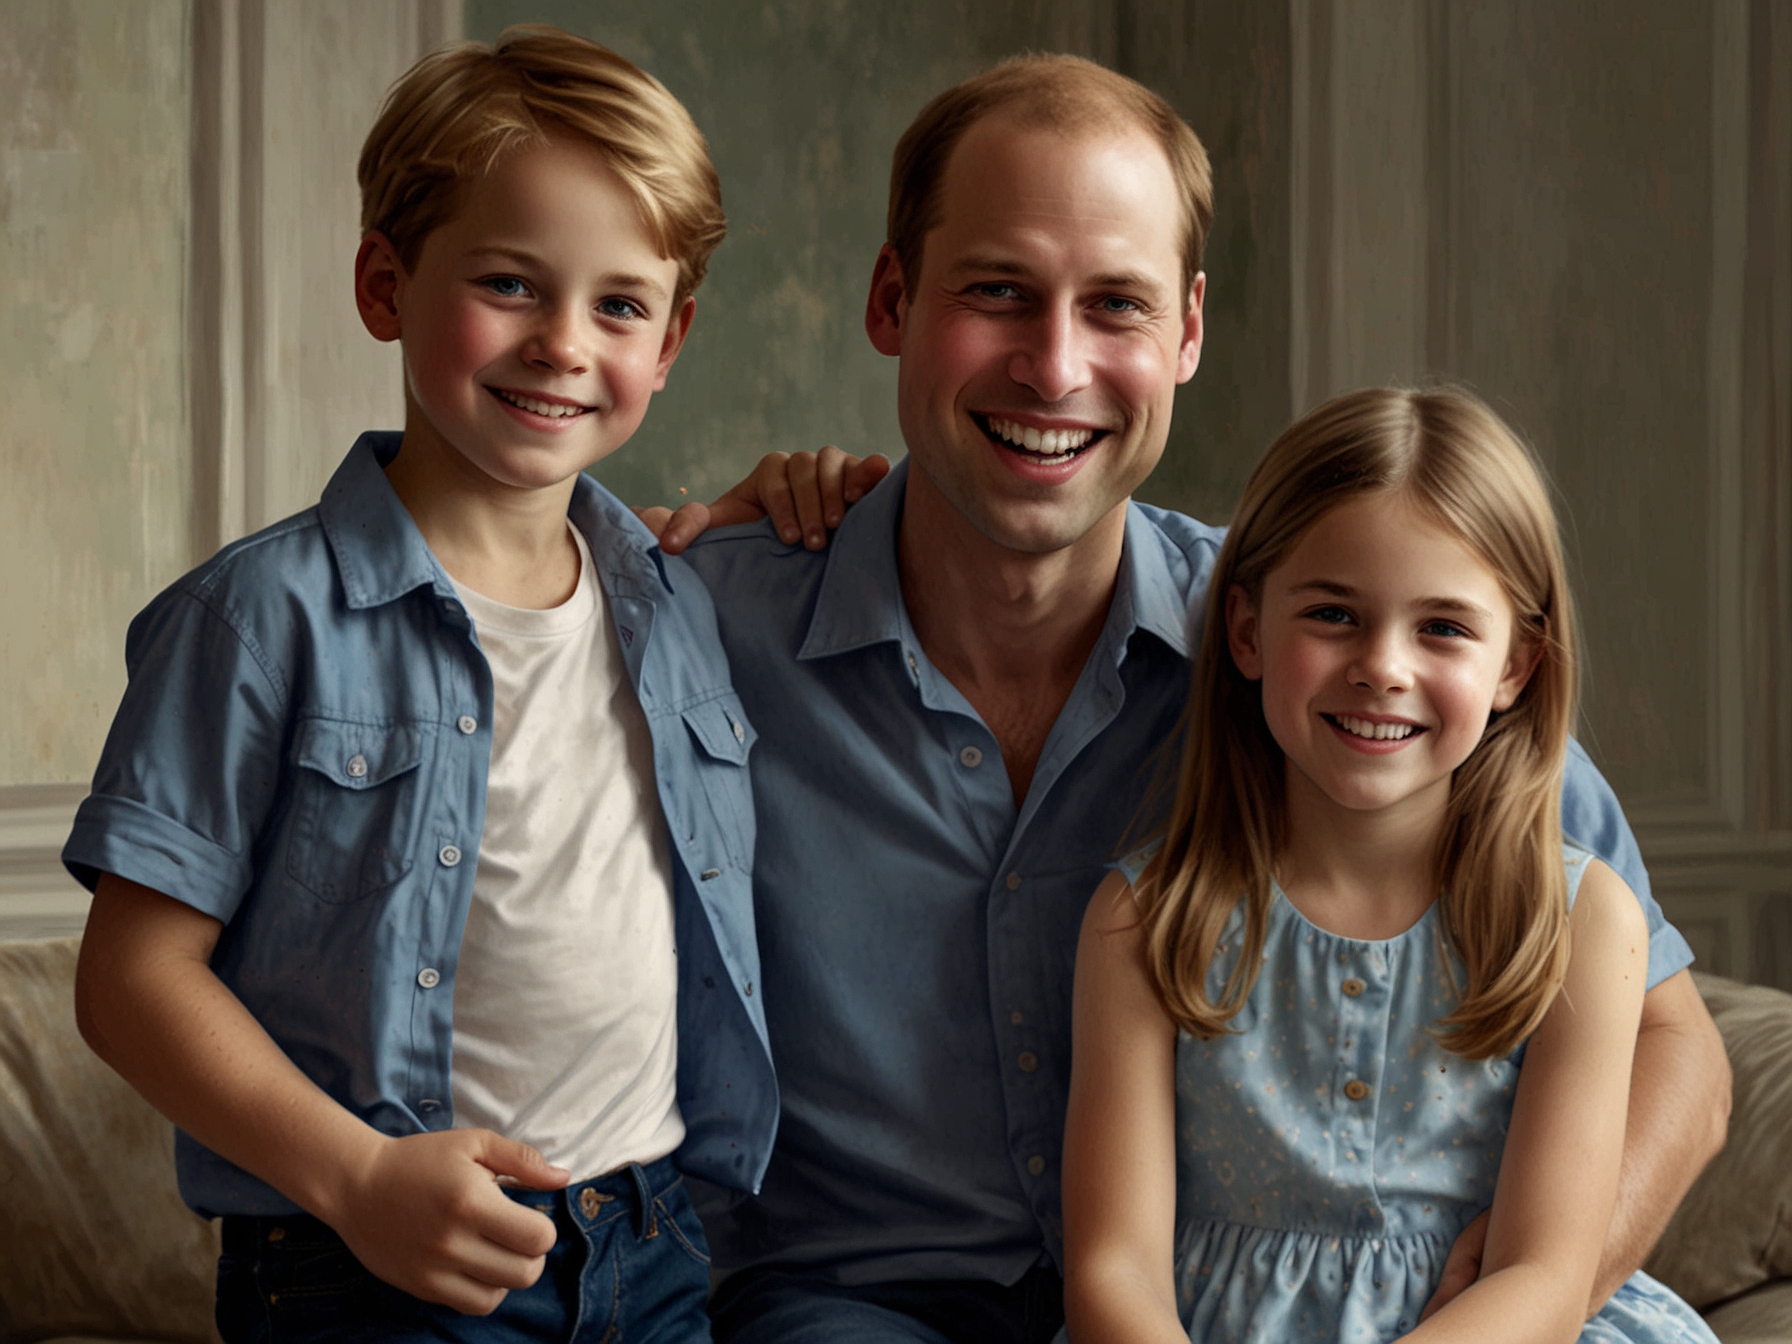 A poignant Father's Day photo featuring Prince William surrounded by his joyful children, emphasizing the royal family's deep bond and the love shared among them.